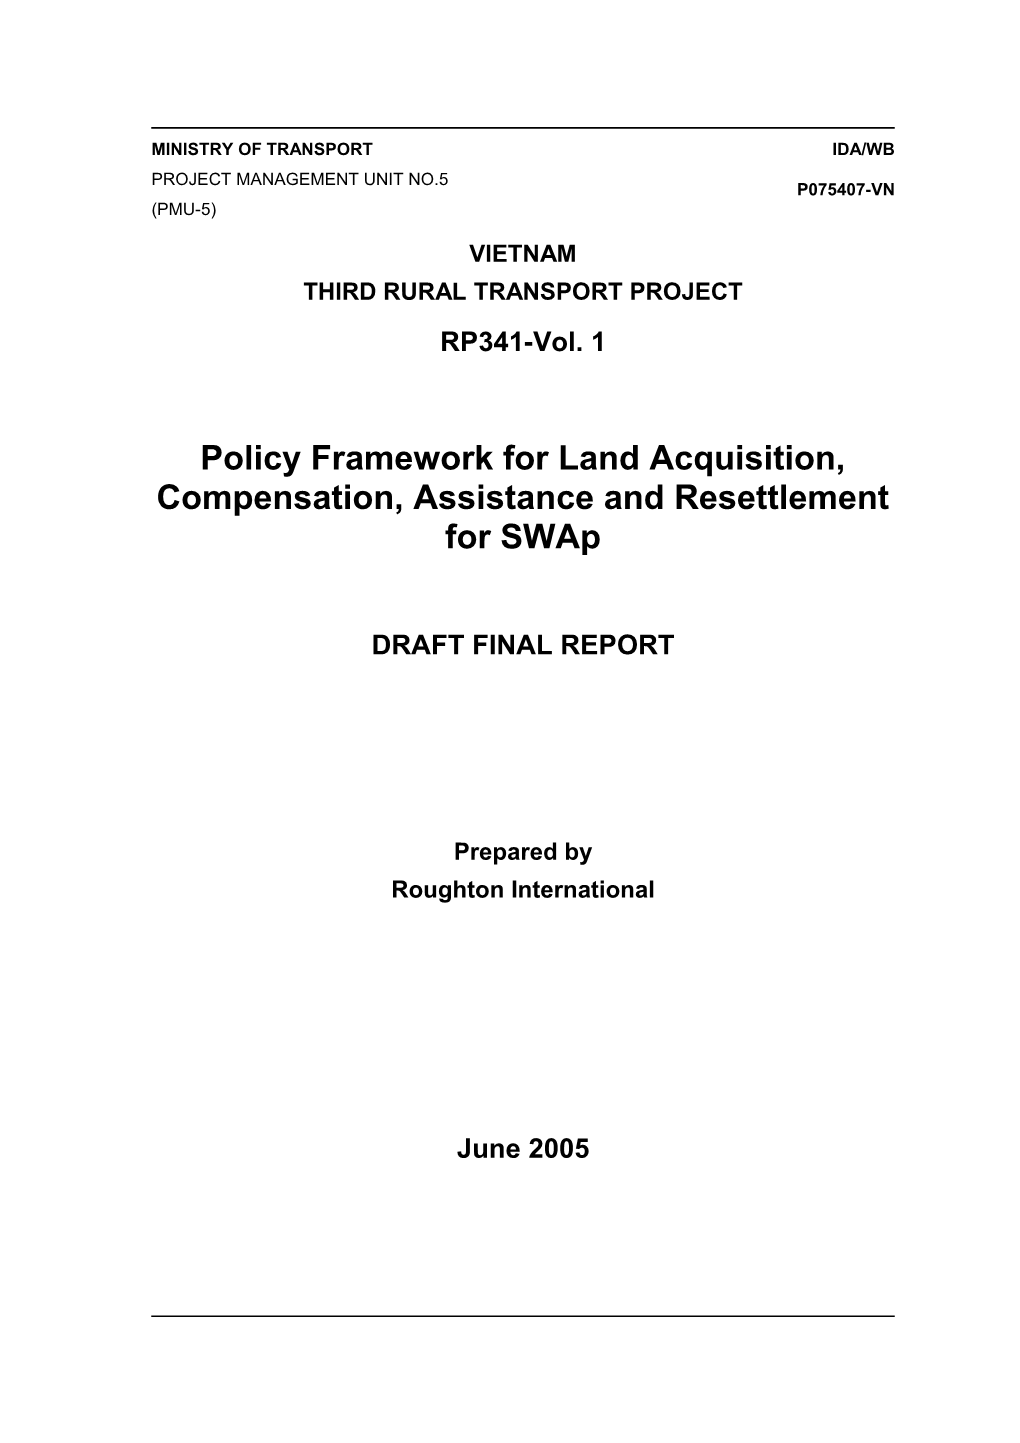 Policy Framework For Land Acquisition, Compensation, Assistance And Resettlement